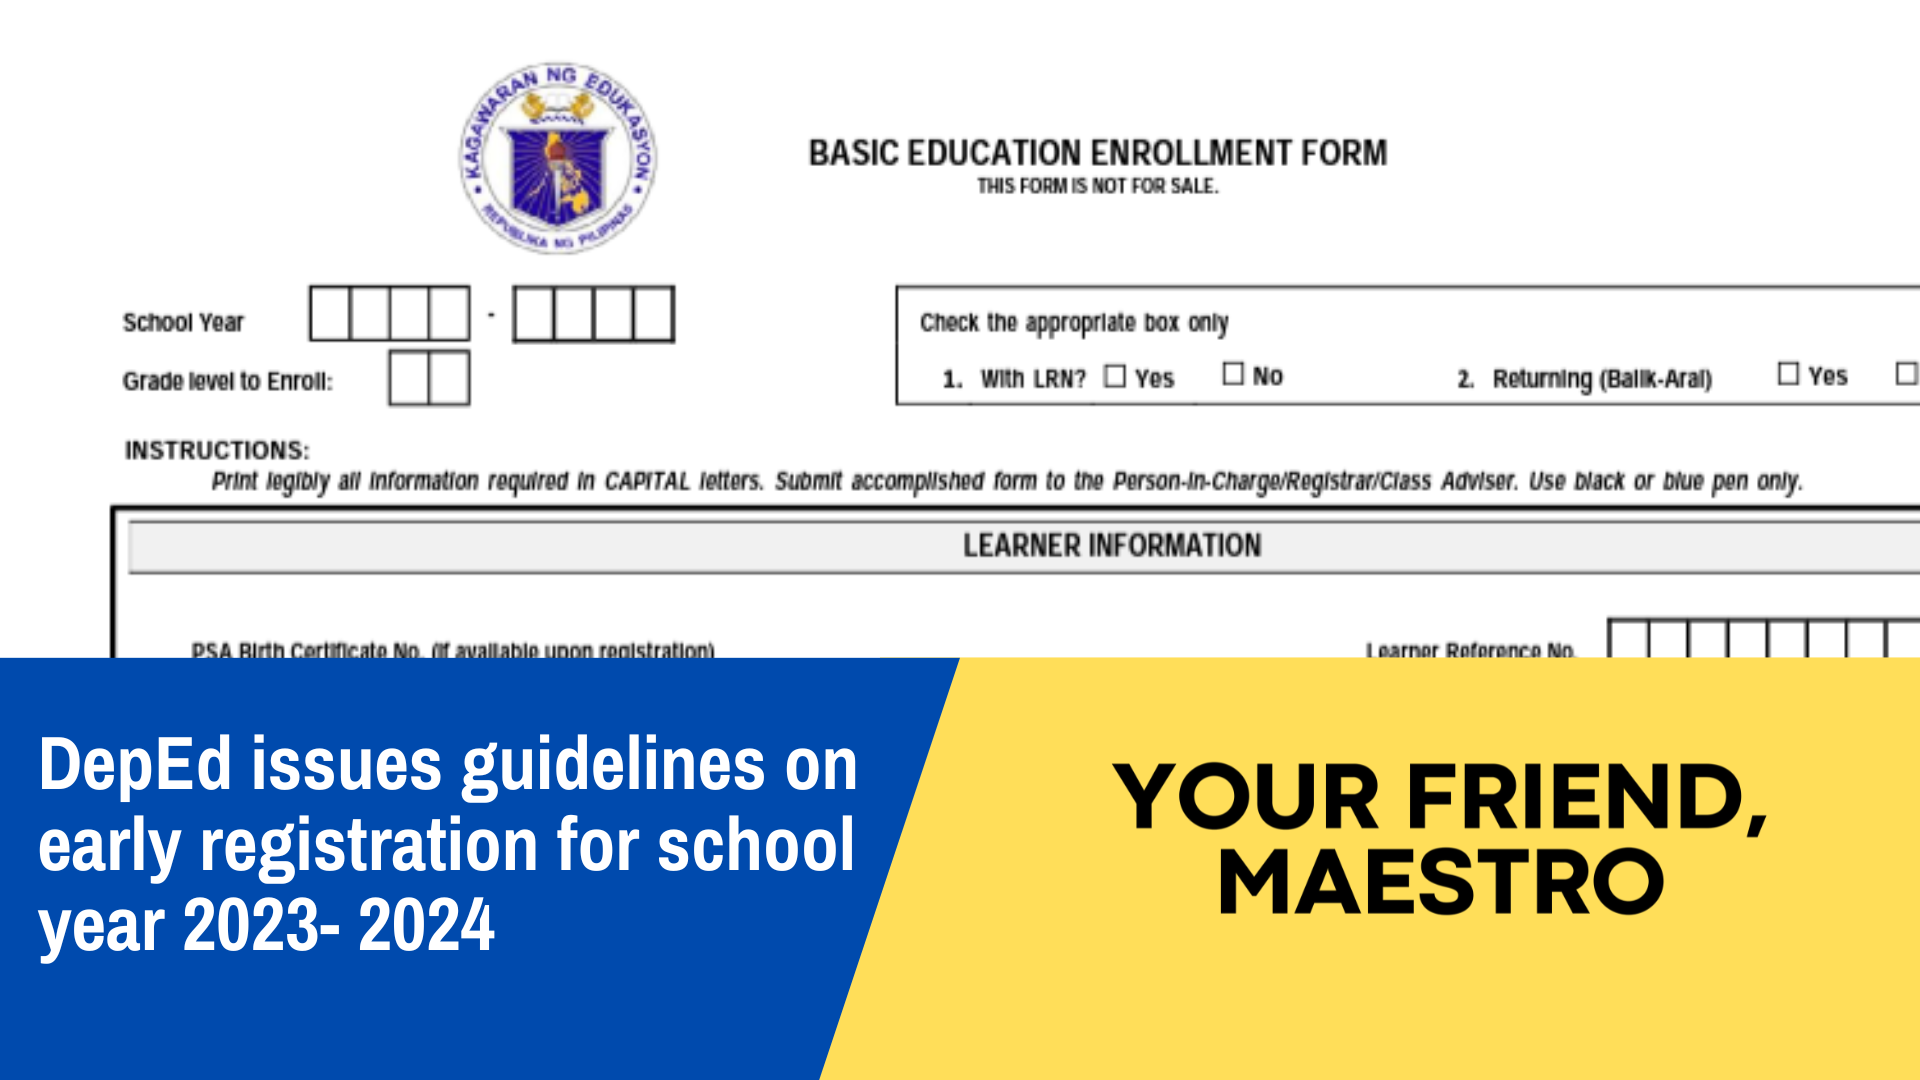 DepEd issues guidelines on early registration for school year 2023 2024